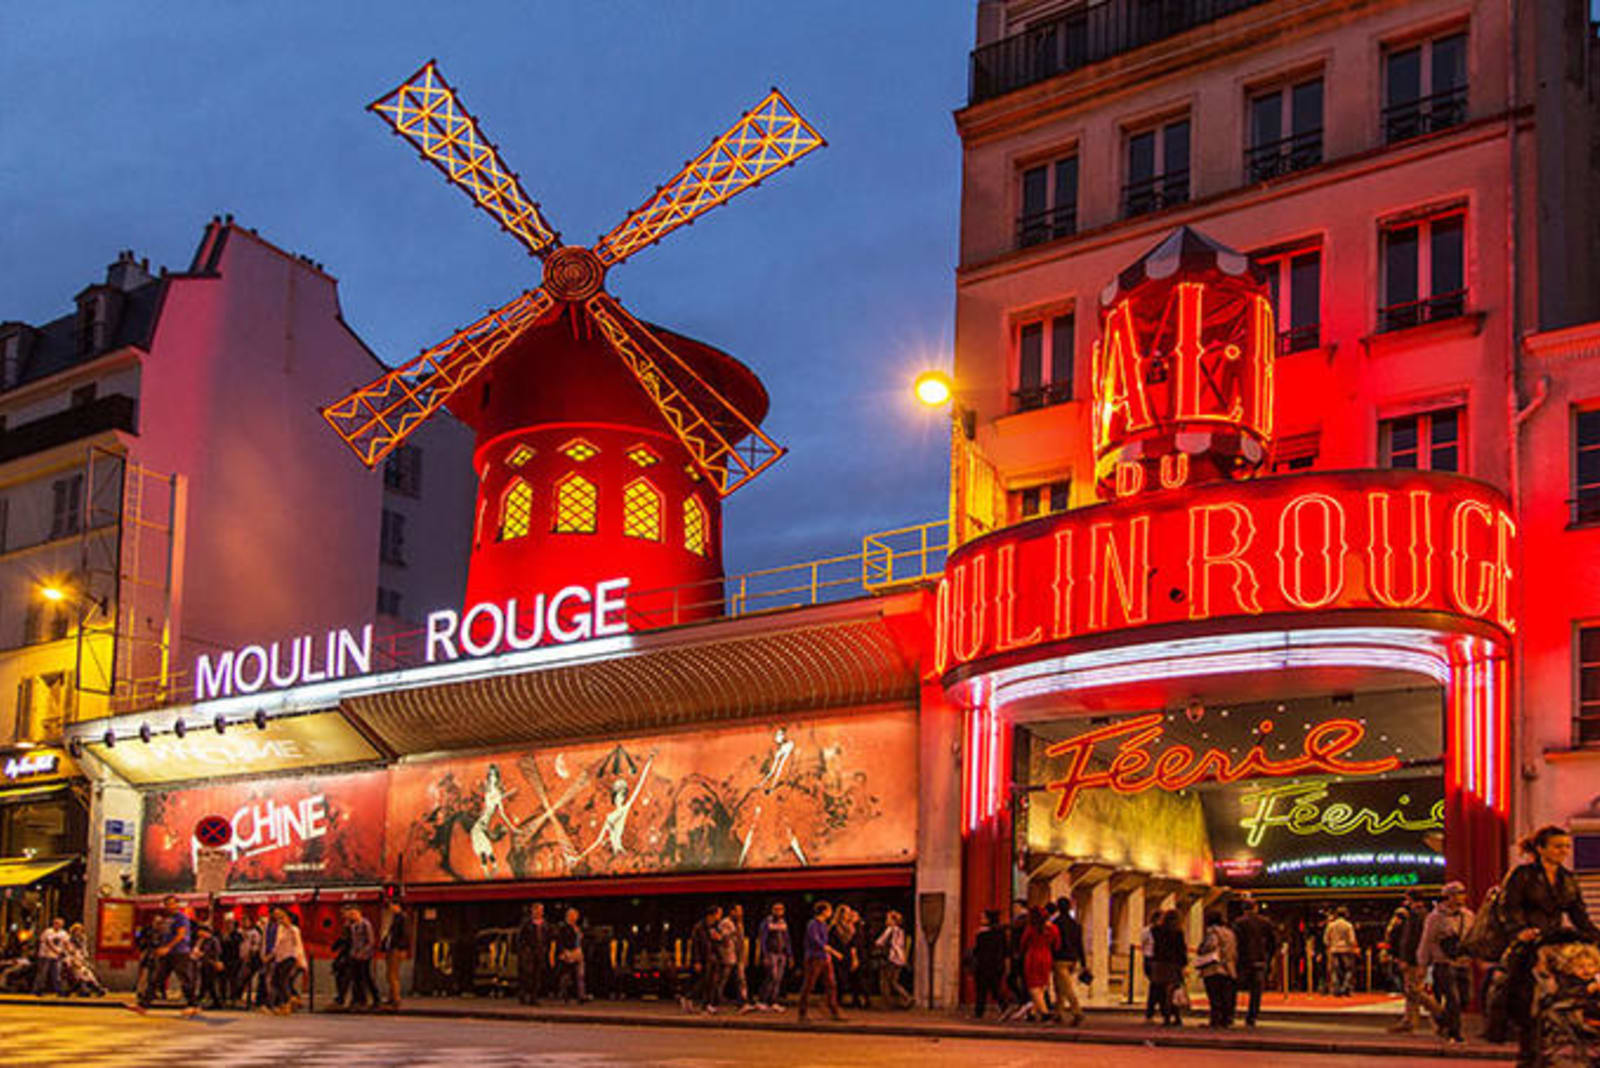 Moulin Rouge Cabaret building in Paris - lit with neon red lights, and featuring a windmill replica